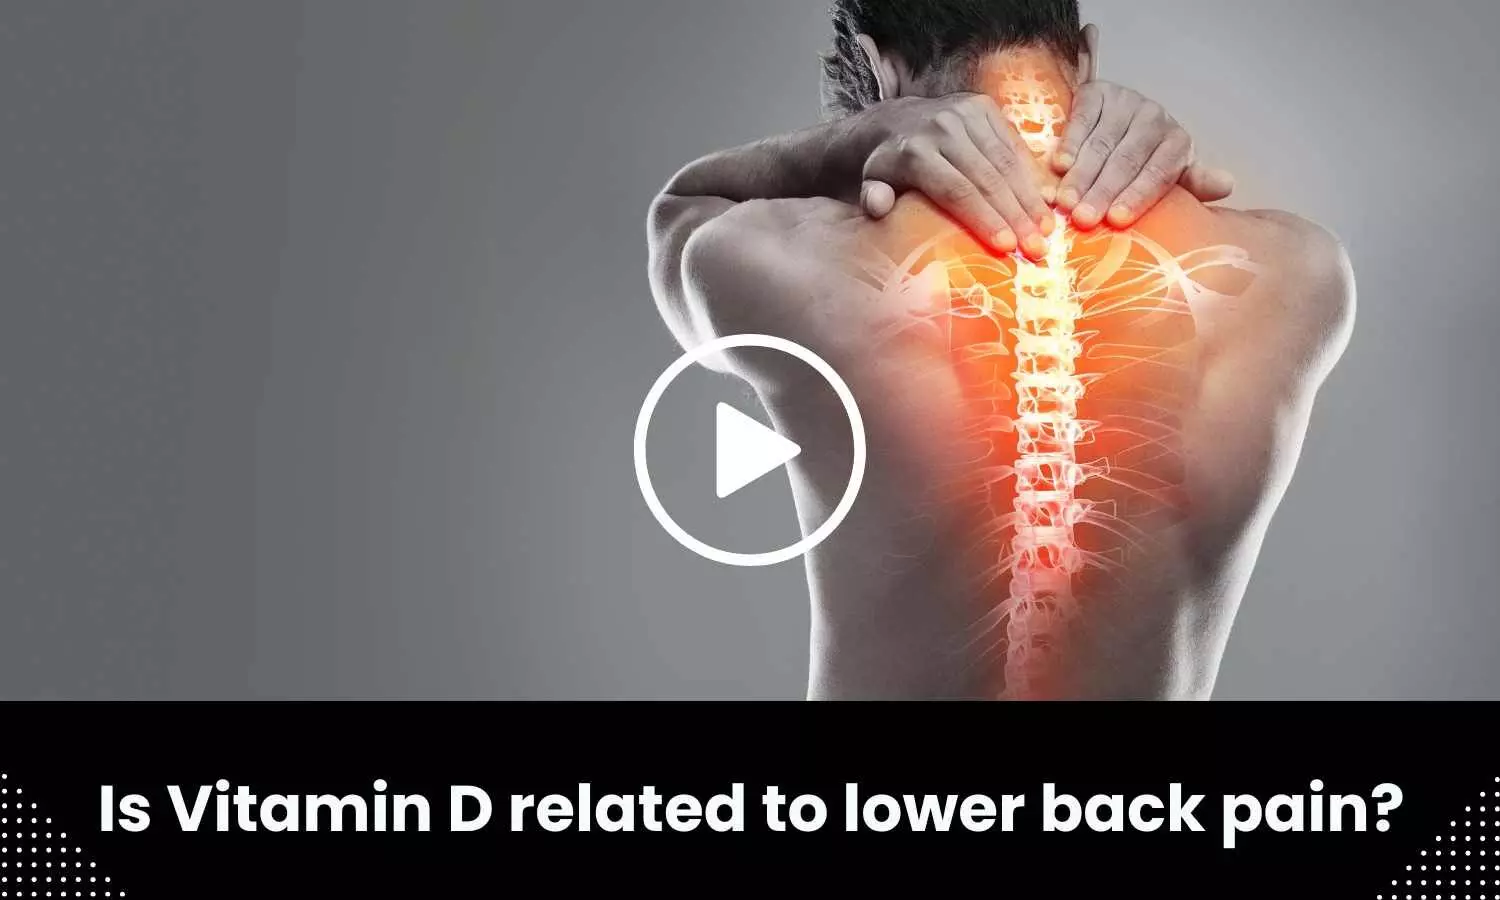 Is Vitamin D related to lower back pain? Study finds out